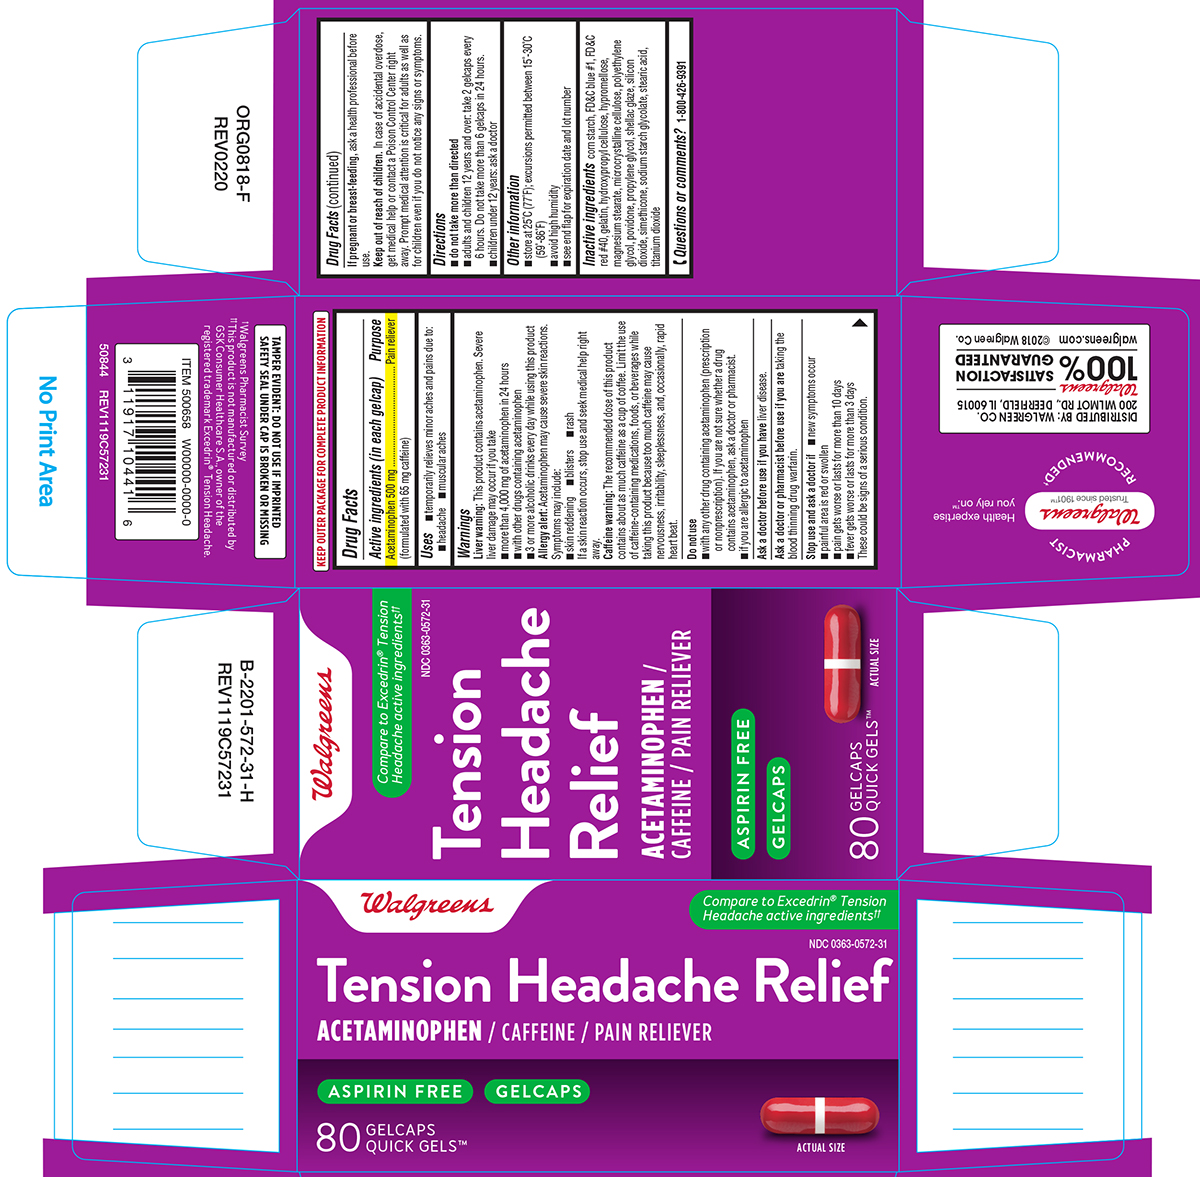 NDC 03630572 Tension Headache Relief Images Packaging, Labeling